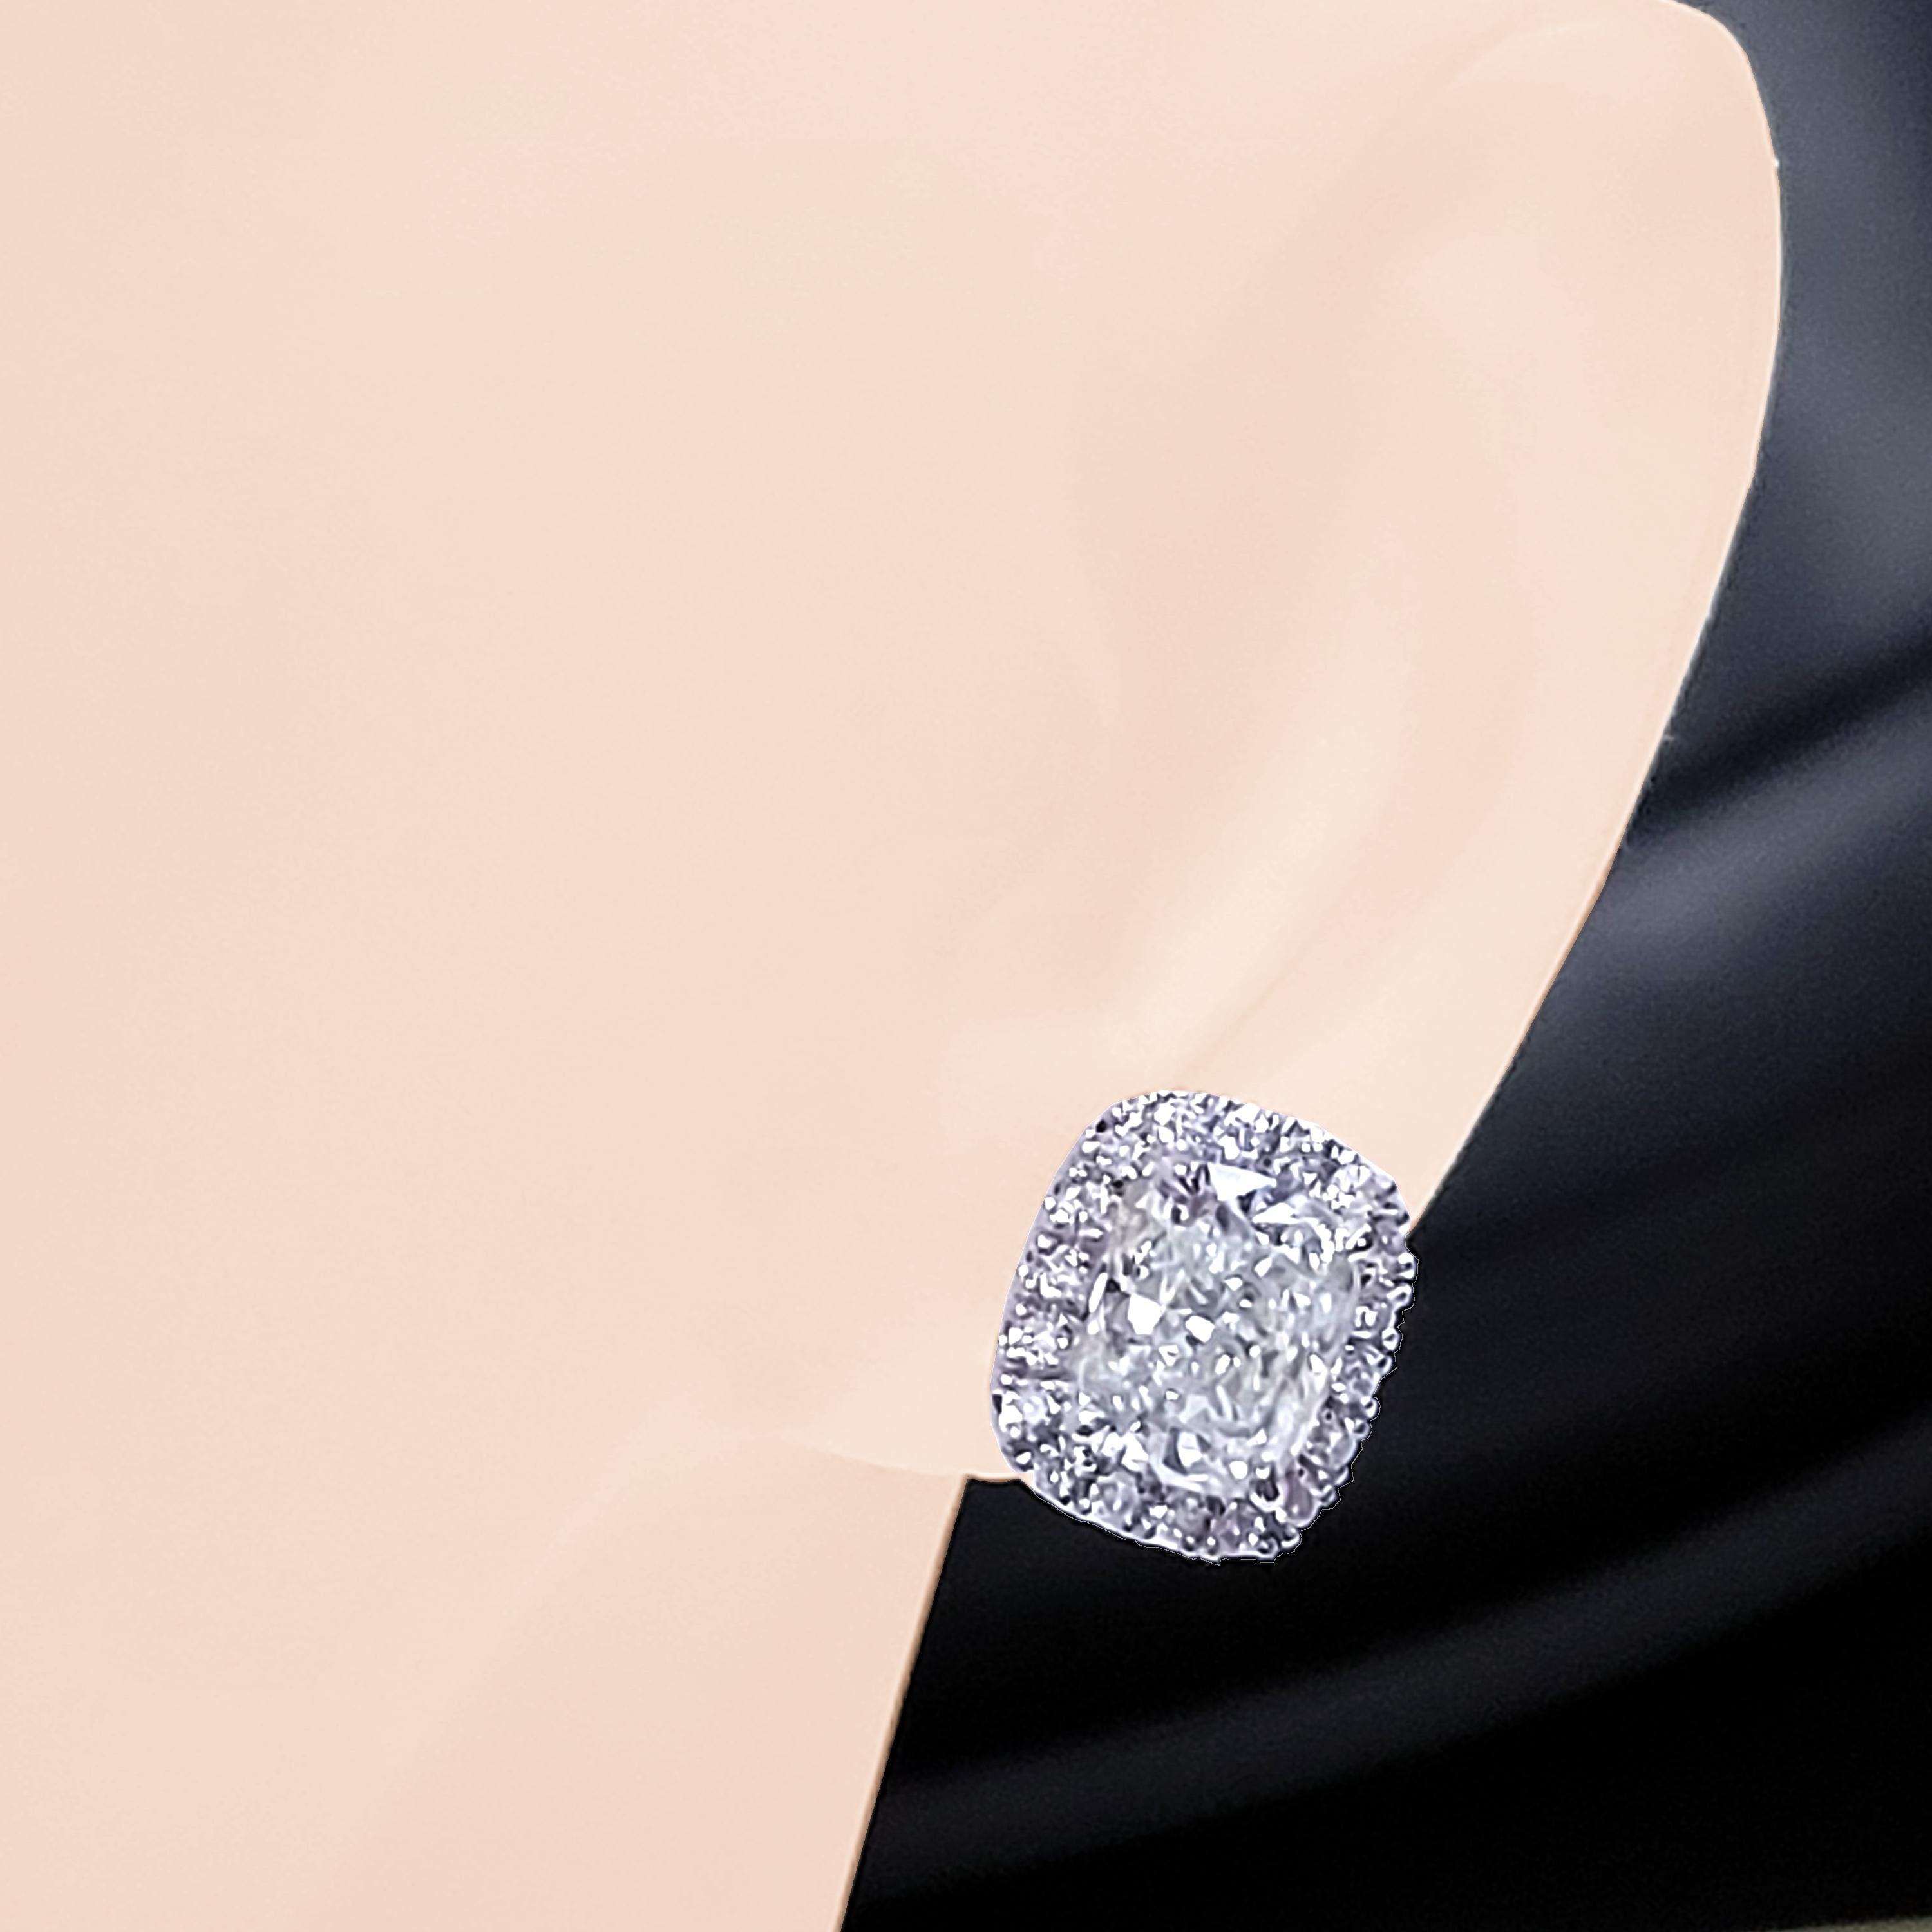 This beautiful pair of Diamond Earrings is made in 14K Gold with a pair of Cushion Modified Brilliant Diamonds with total weight of 2.94 Ct in the center of a Pave Set Halo with 36 pieces of 1.2 mm Round Brilliant diamonds (Total weight=0.28 Ct).